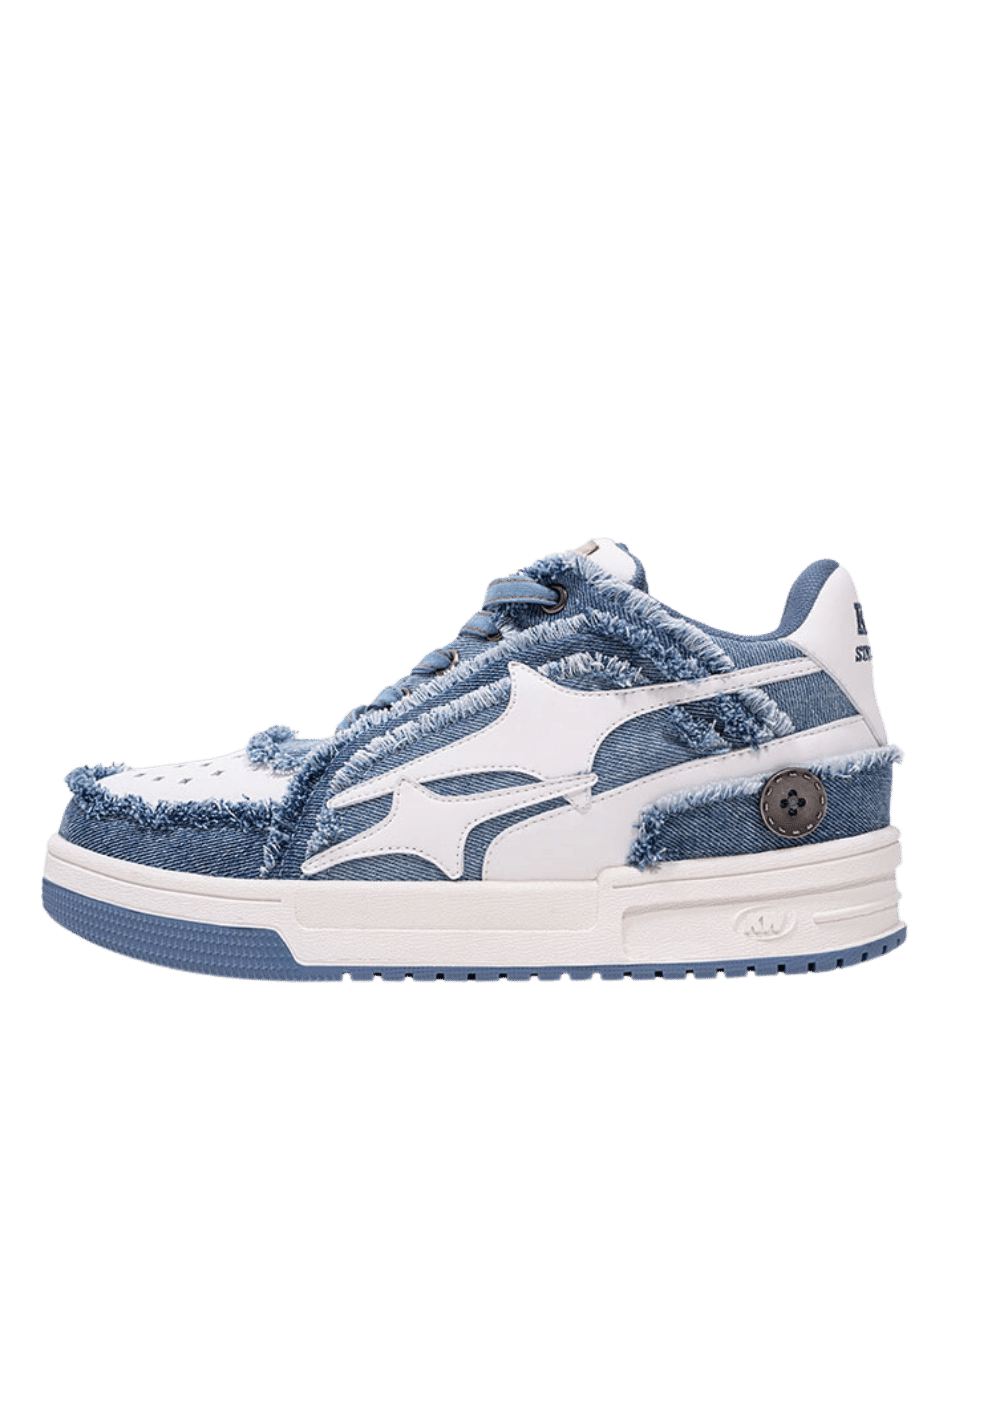 Shattered Meteor Low Top Sneakers - PSYLOS 1, Shattered Meteor Low Top Sneakers, Shoes, KILLWINNER, PSYLOS 1